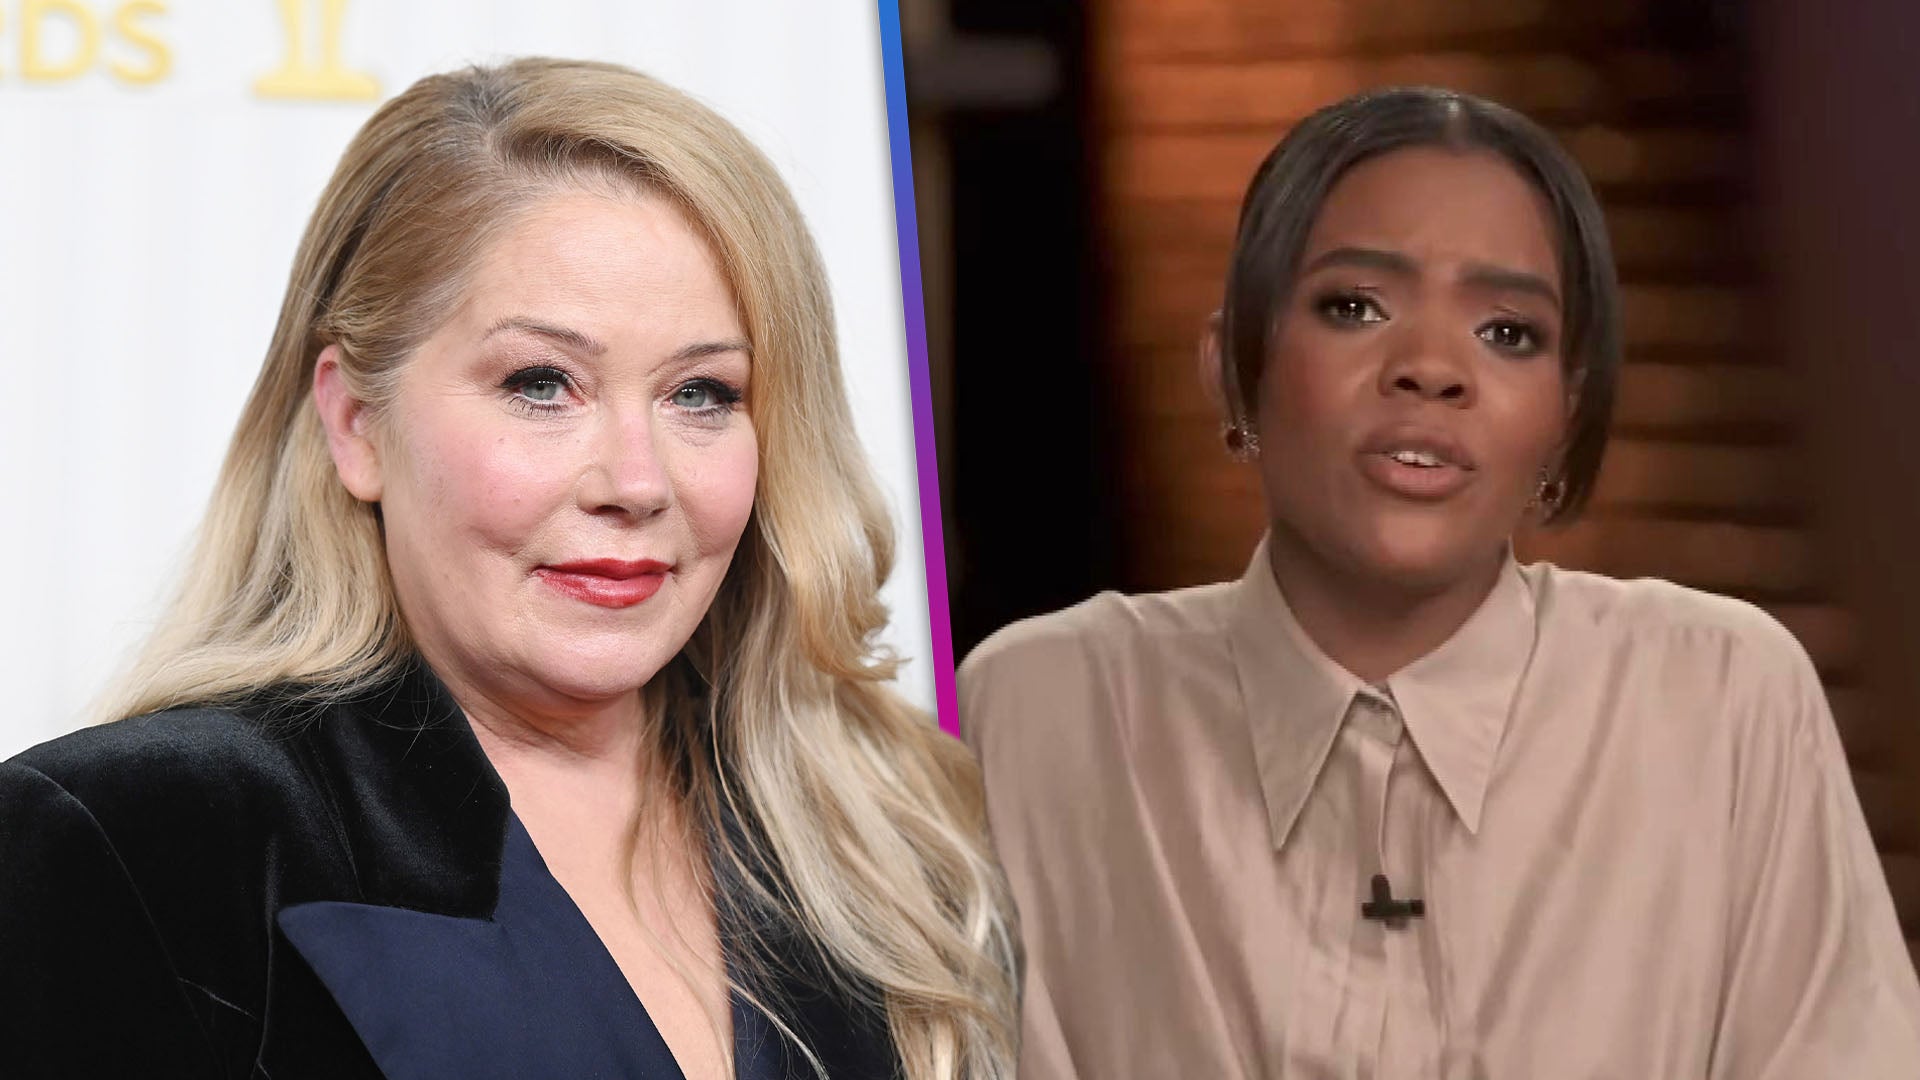 Christina Applegate Slams Candace Owens for Criticizing Fashion Campaign  Featuring a Disabled Model